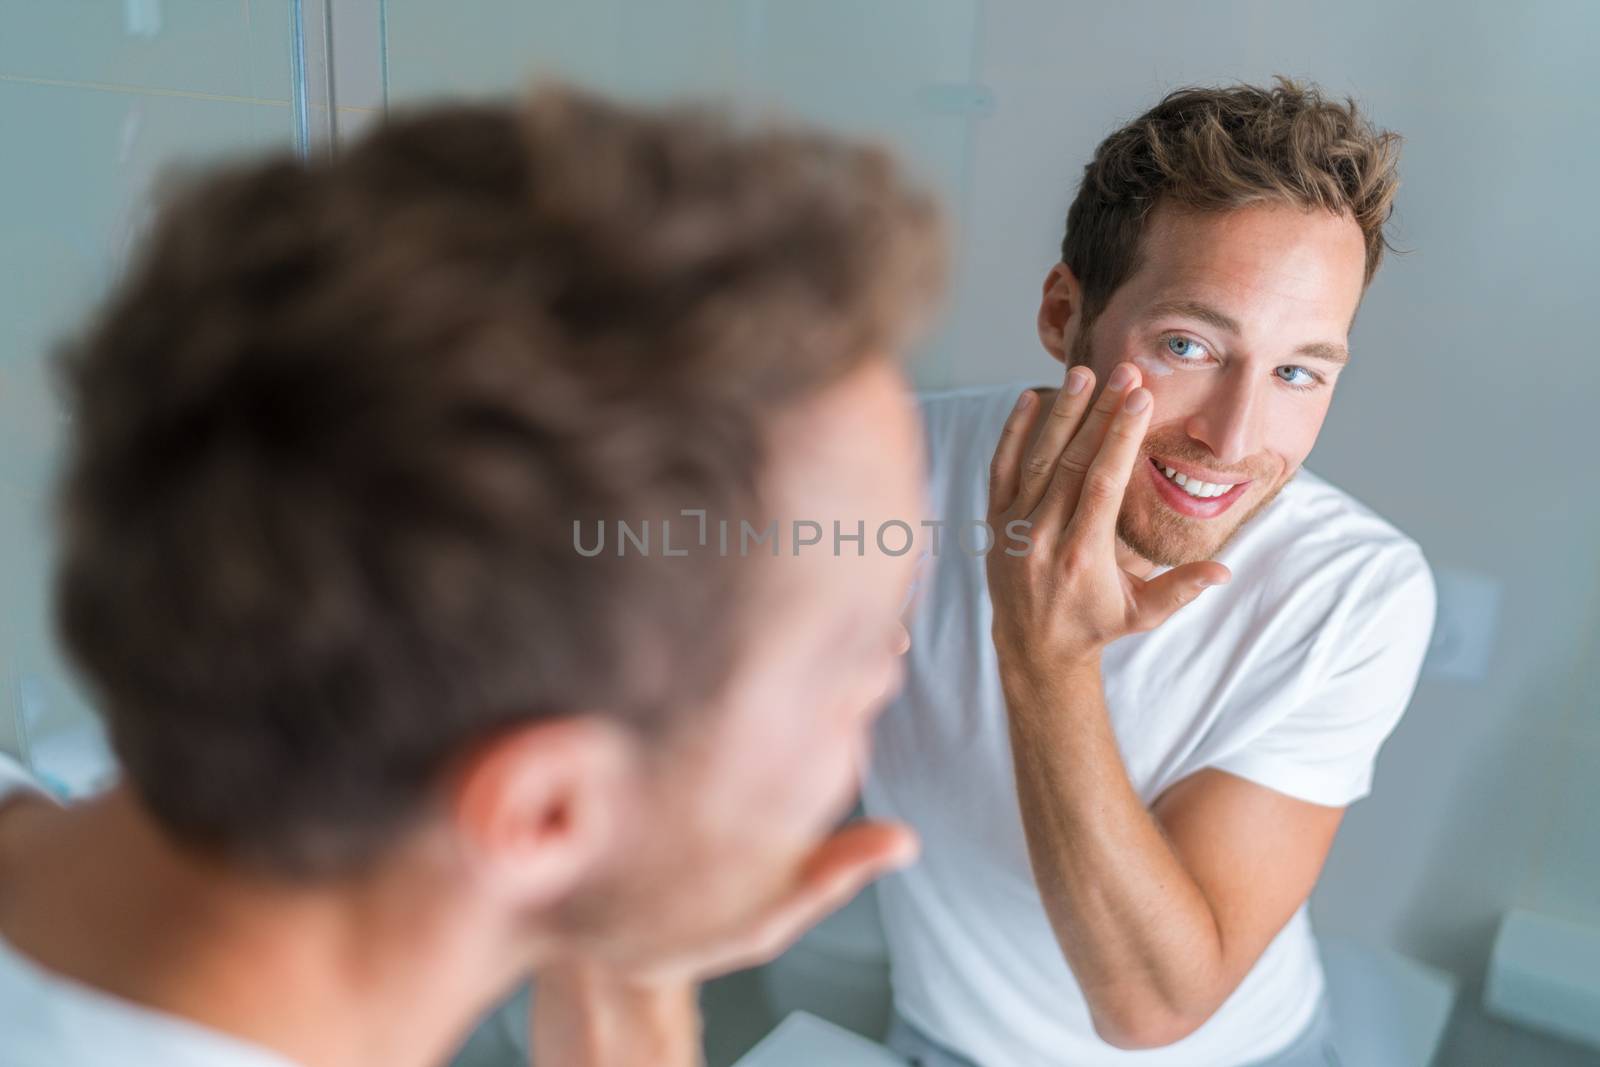 Man putting skincare facial treatment cream on face. Anti-aging skin care product. Male beauty morning routine at home lifestyle. Guy looking in bathroom mirror applying moisturizer under eyes by Maridav